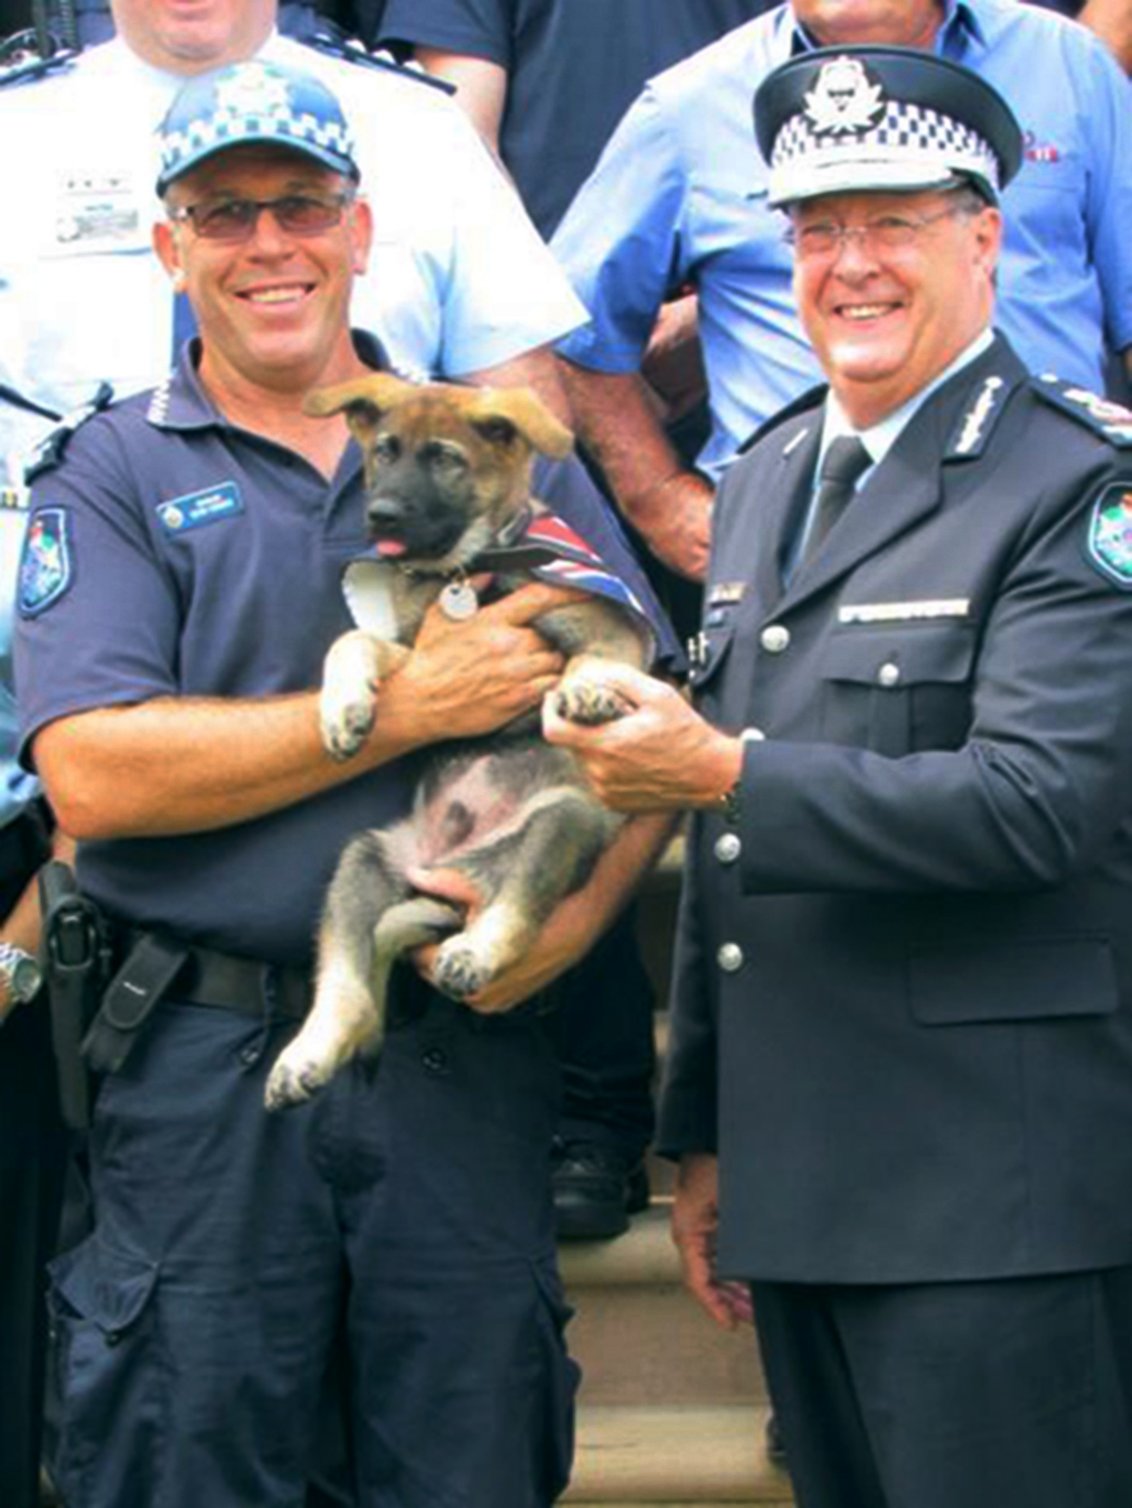 PHOTO: Gavel the German shepherd was given the job of Vice-Regal Dog to the Governor of Queensland after he flunked out of police dog academy for being too friendly.